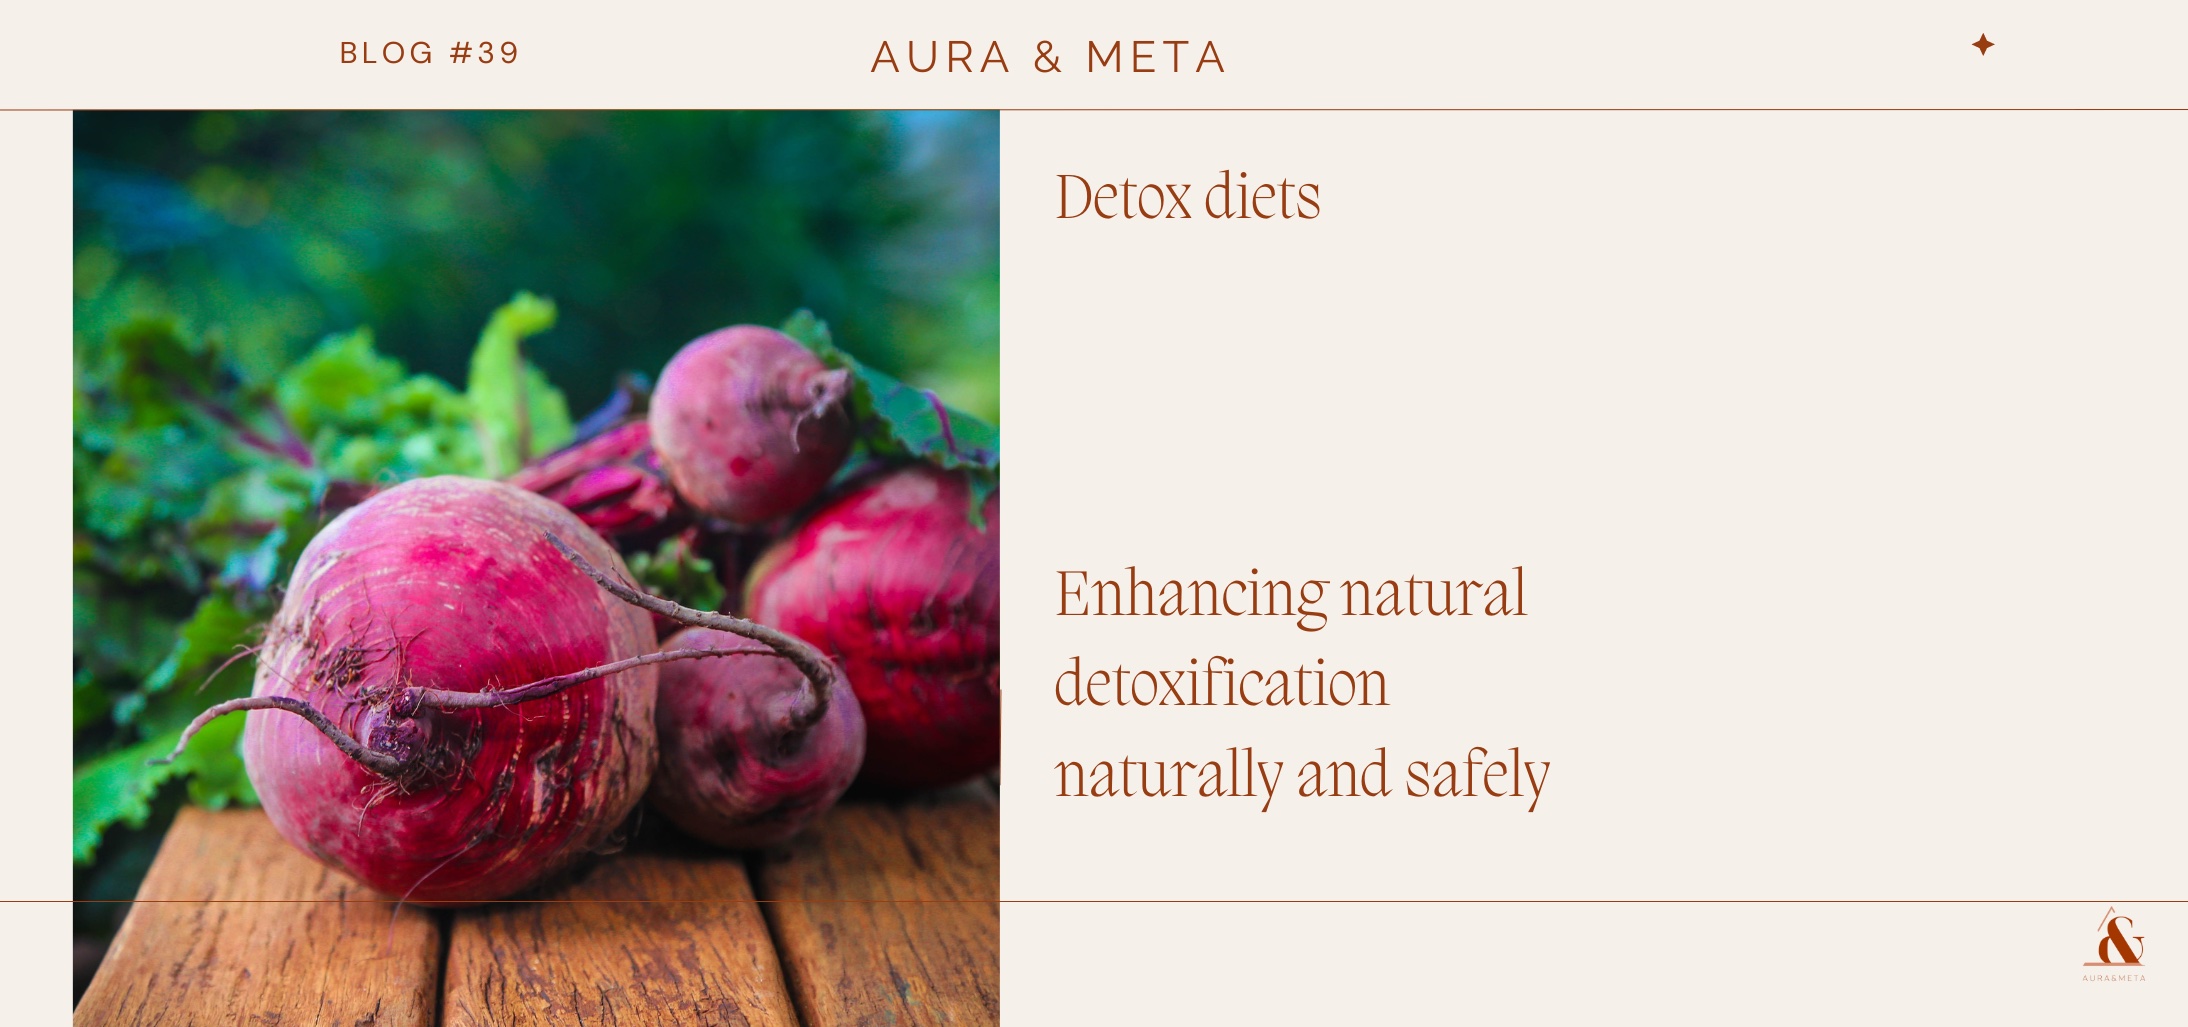 Detox Diets Demystified: Safely Supporting Natural Detoxification